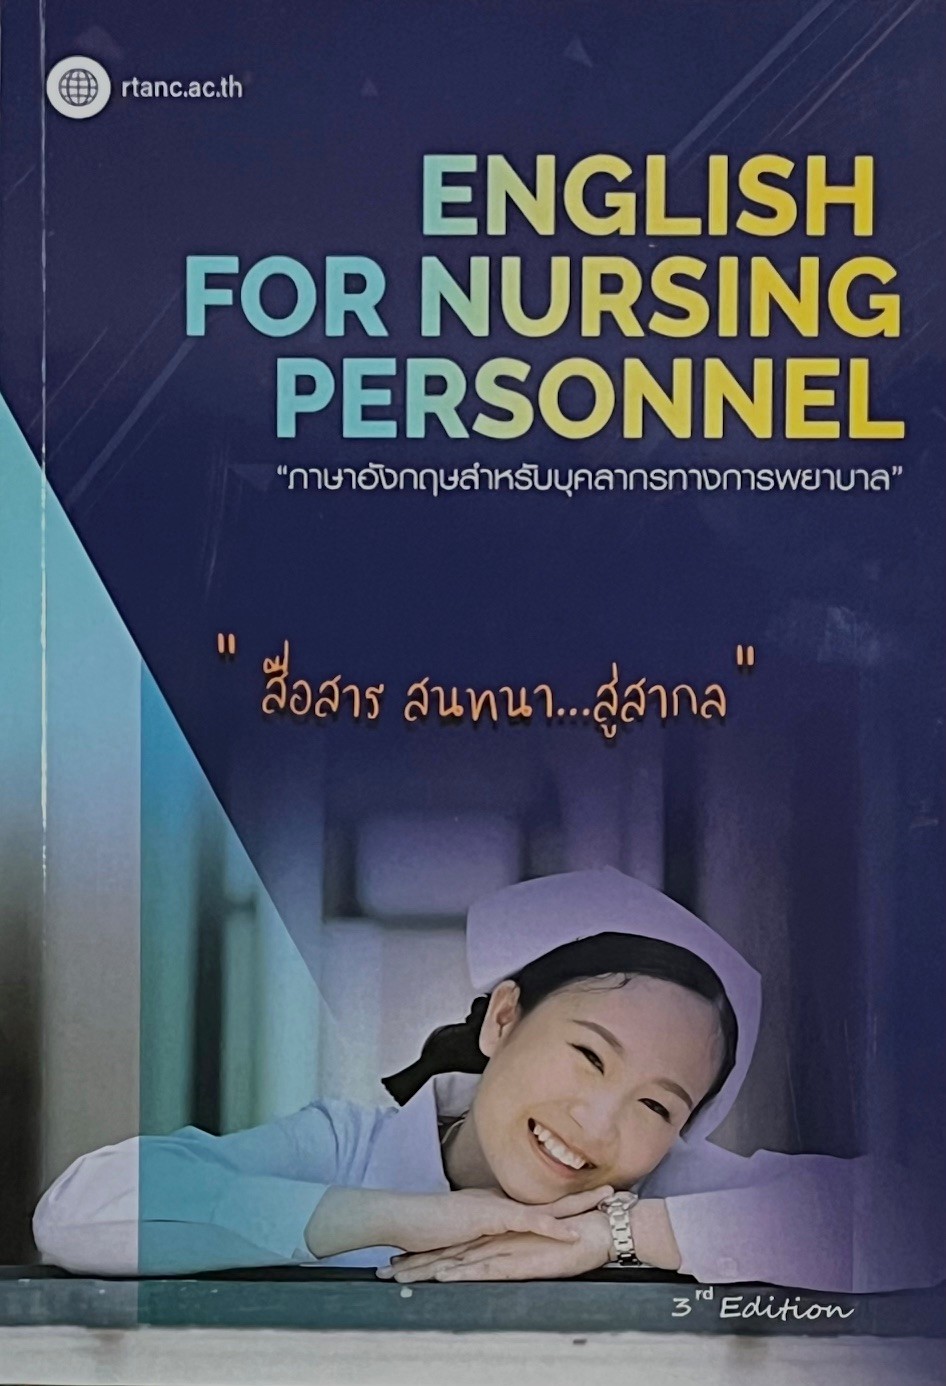 ENGLISH FOR NURSING PERSONNEL